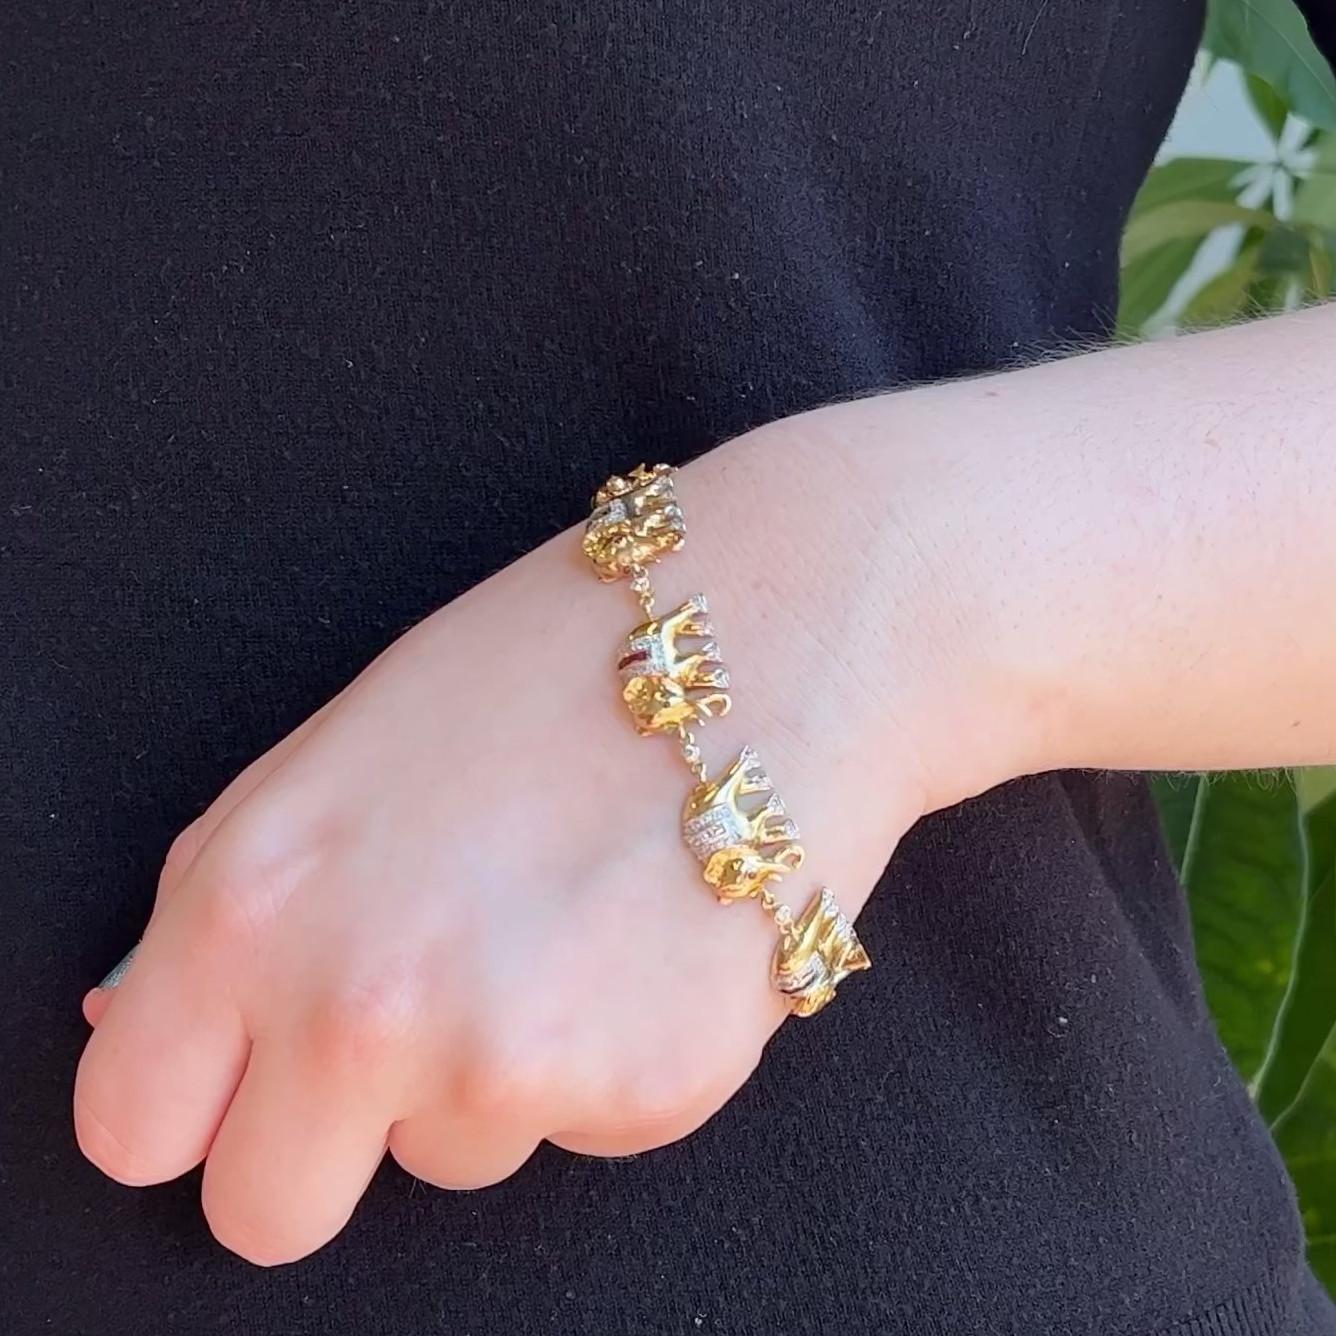 One Vintage Diamond Gemstone 18 Karat Yellow Gold Elephant Bracelet. Featuring 135 round brilliant cut diamonds with a total weight of approximately 1.25 carats, graded near-colorless, VS clarity. Accented by 16 mixed cut rubies with a total weight